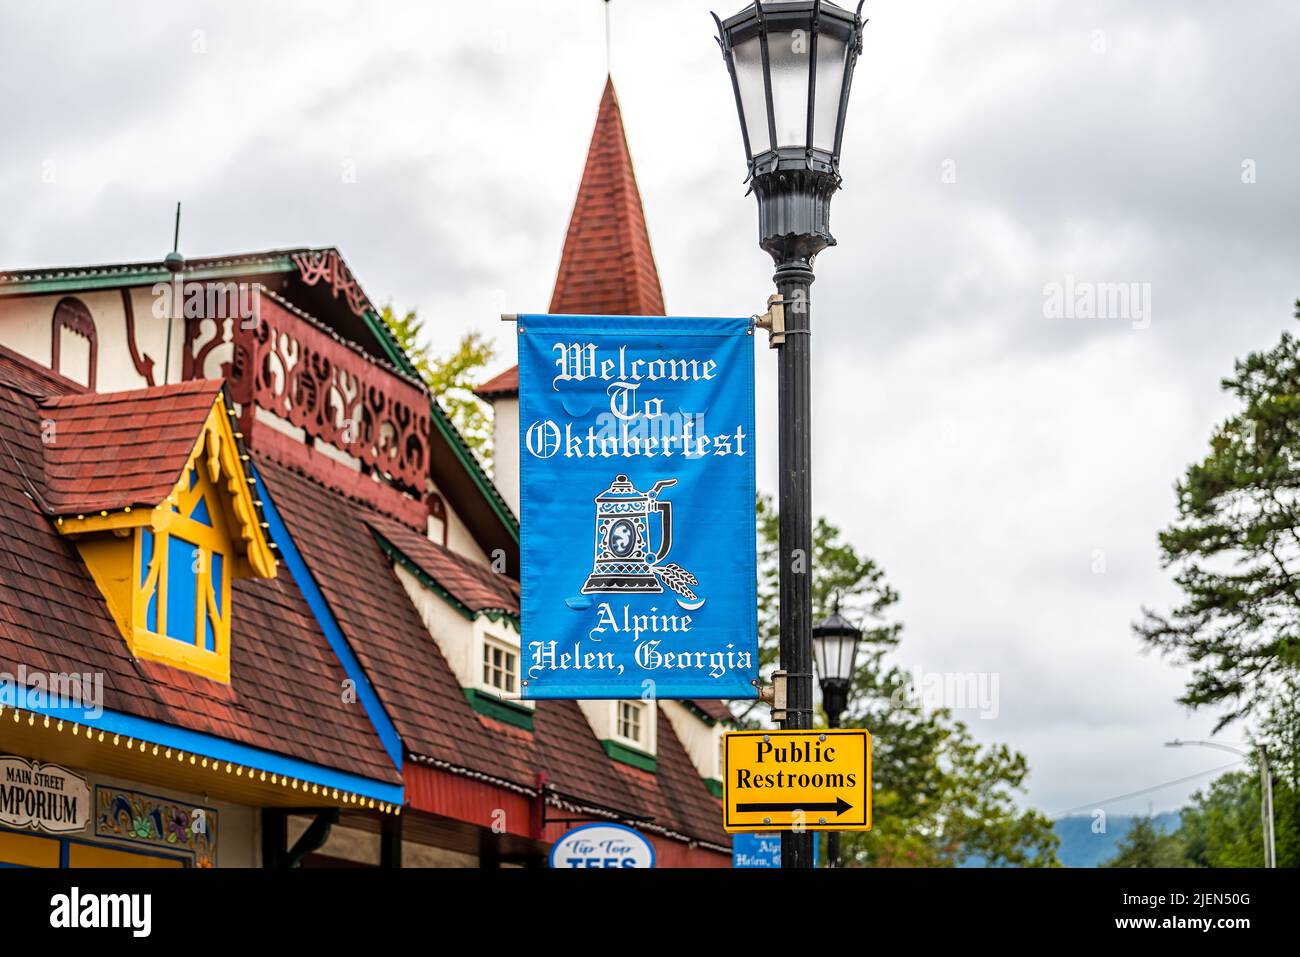 Helen, USA - October 5, 2021: Bavarian village of Helen, Georgia with welcome sign for famous Oktoberfest festival in fall season with tower architect Stock Photo